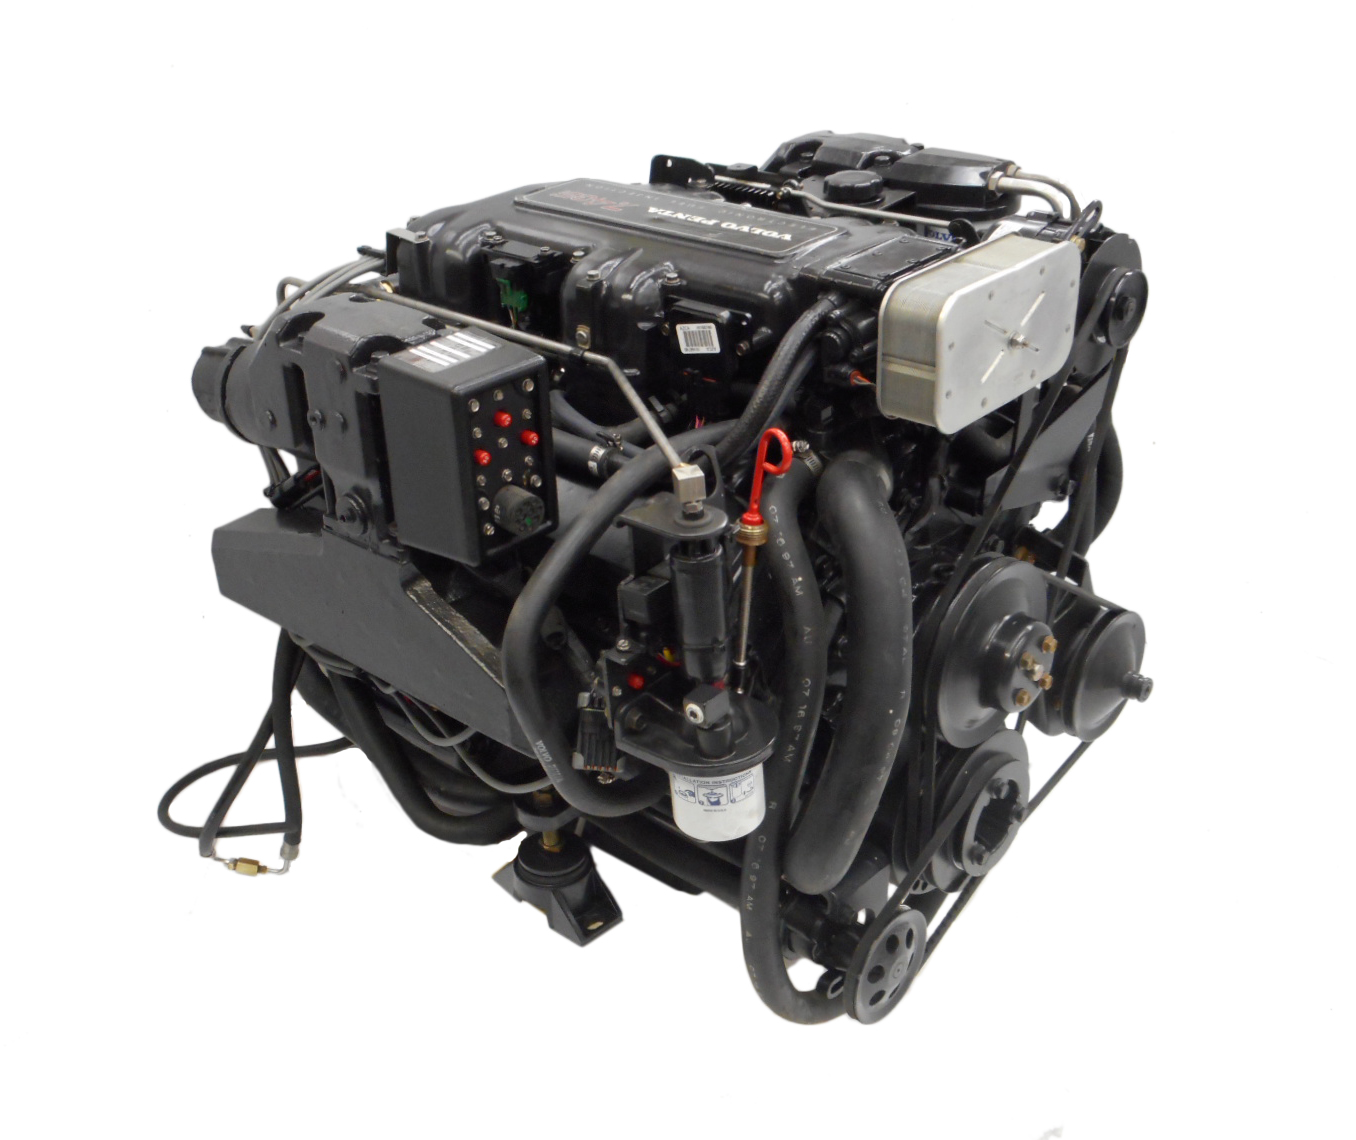 Sell Volvo Penta 74l 454 Gsi Complete Boat Engine New Fuel Injected